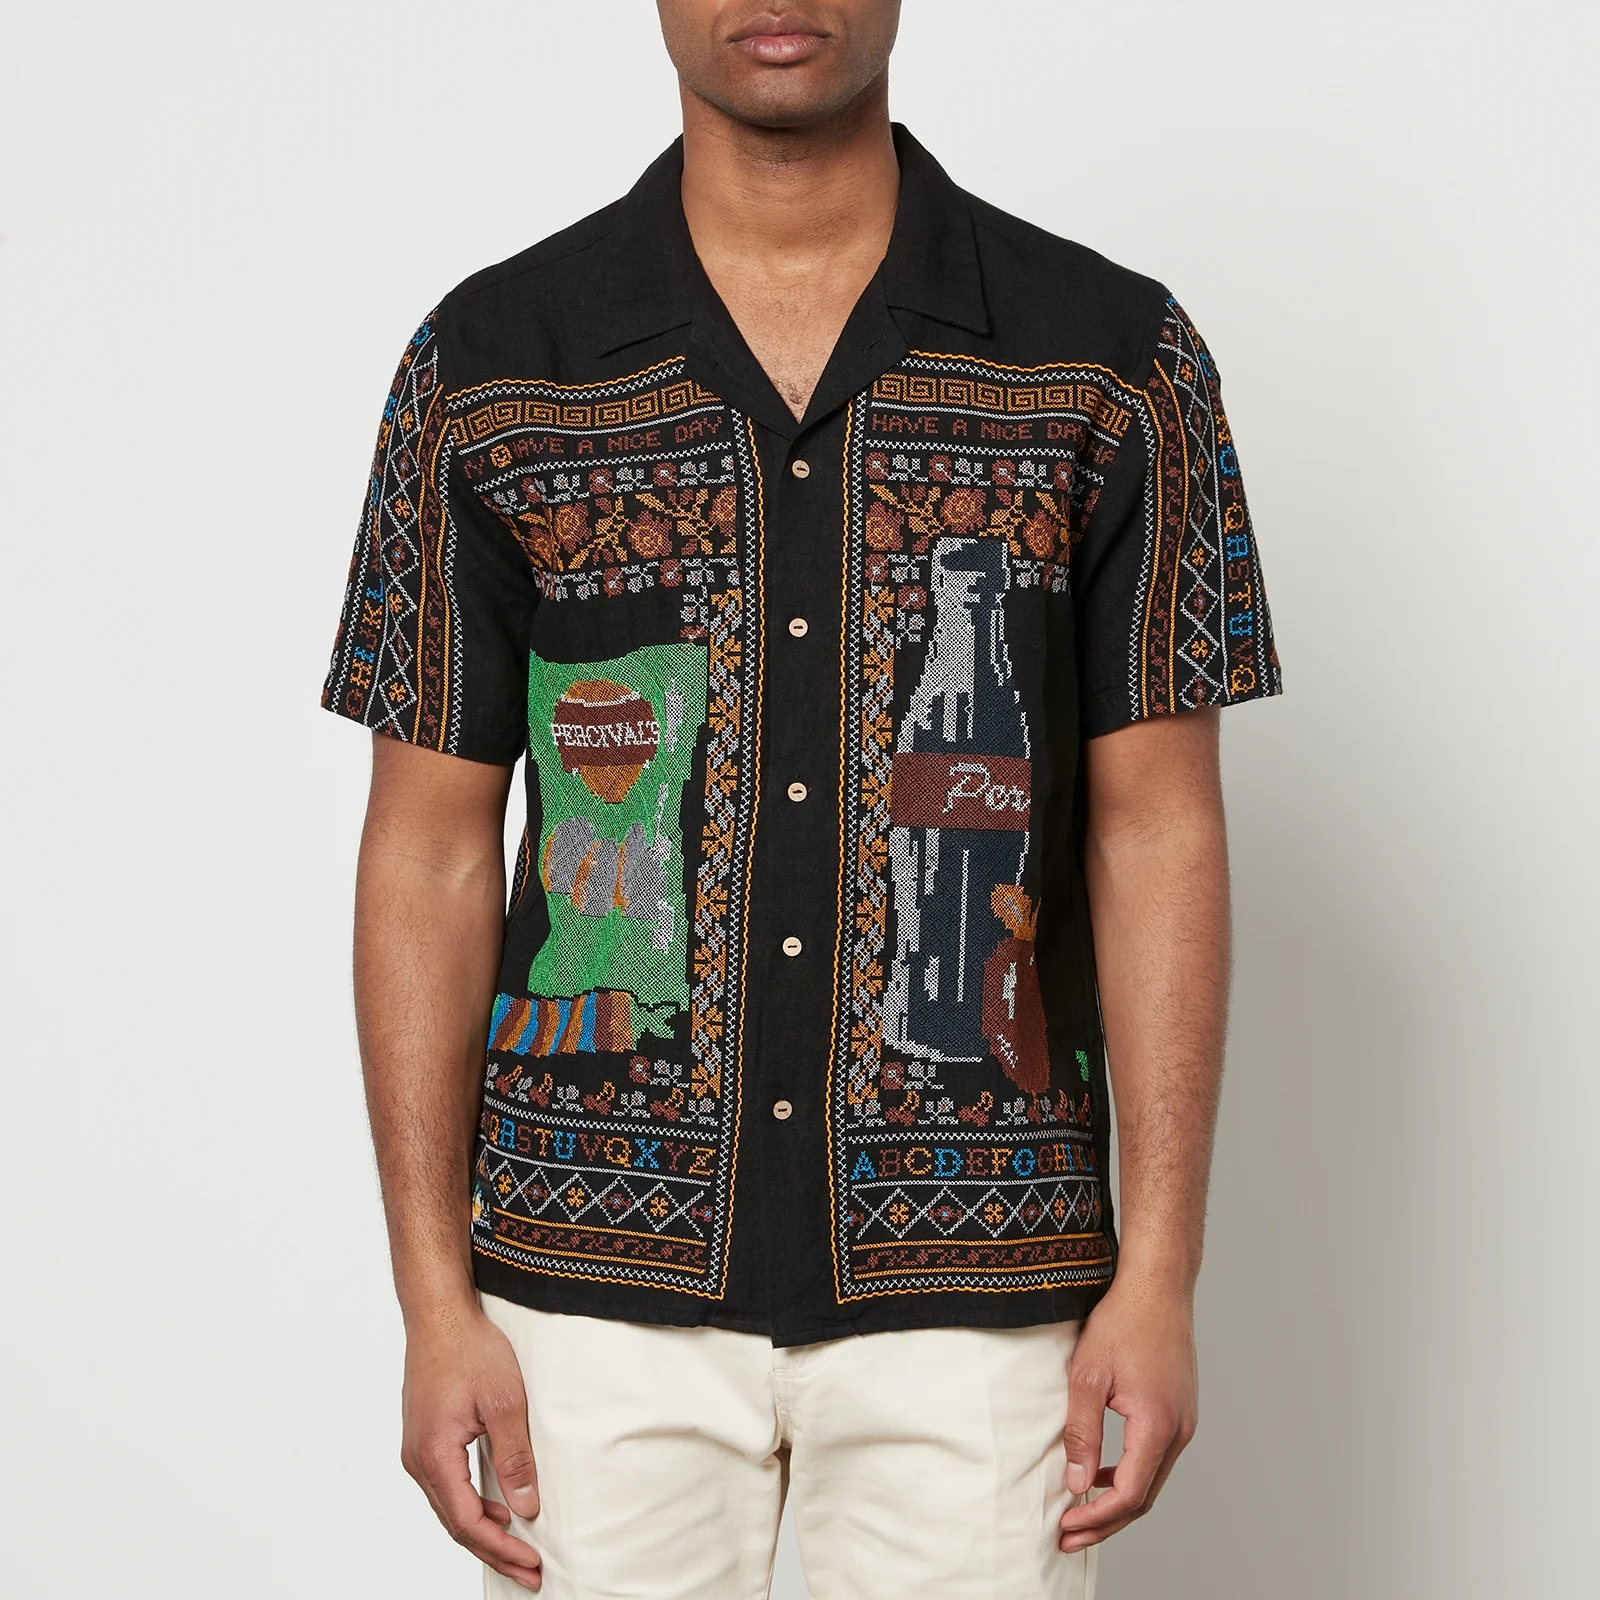 Percival Meal Deal Embroidered Linen Shirt - S Image 1